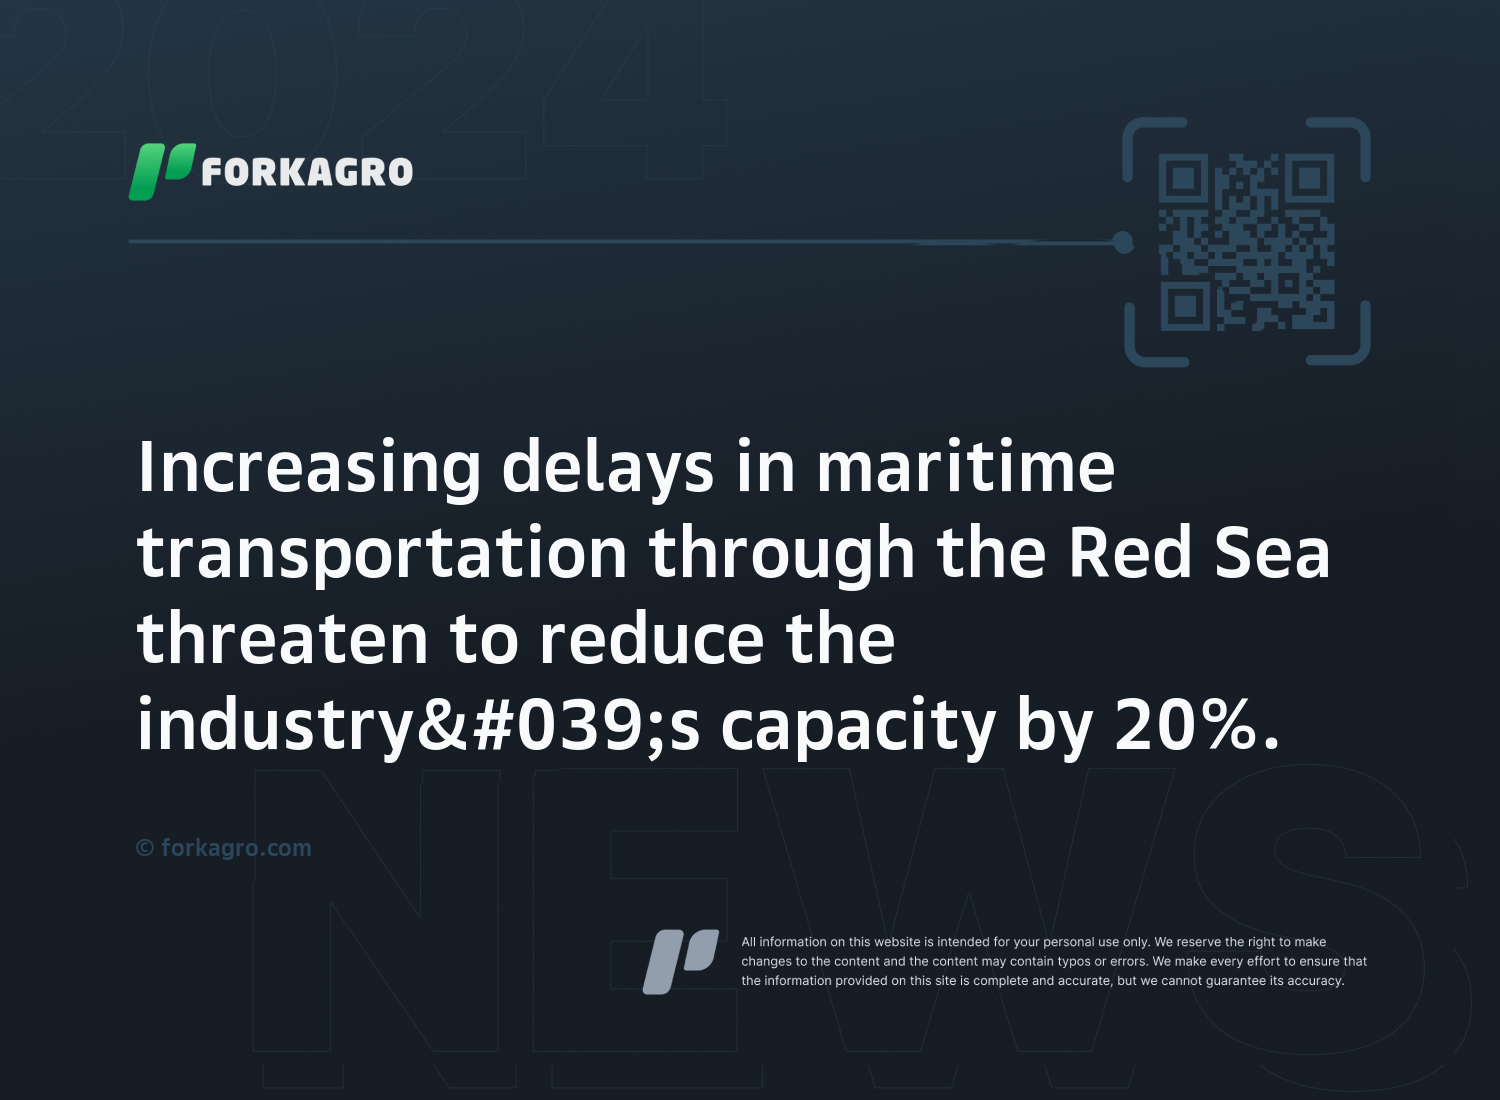 Increasing delays in maritime transportation through the Red Sea threaten to reduce the industry's capacity by 20%.